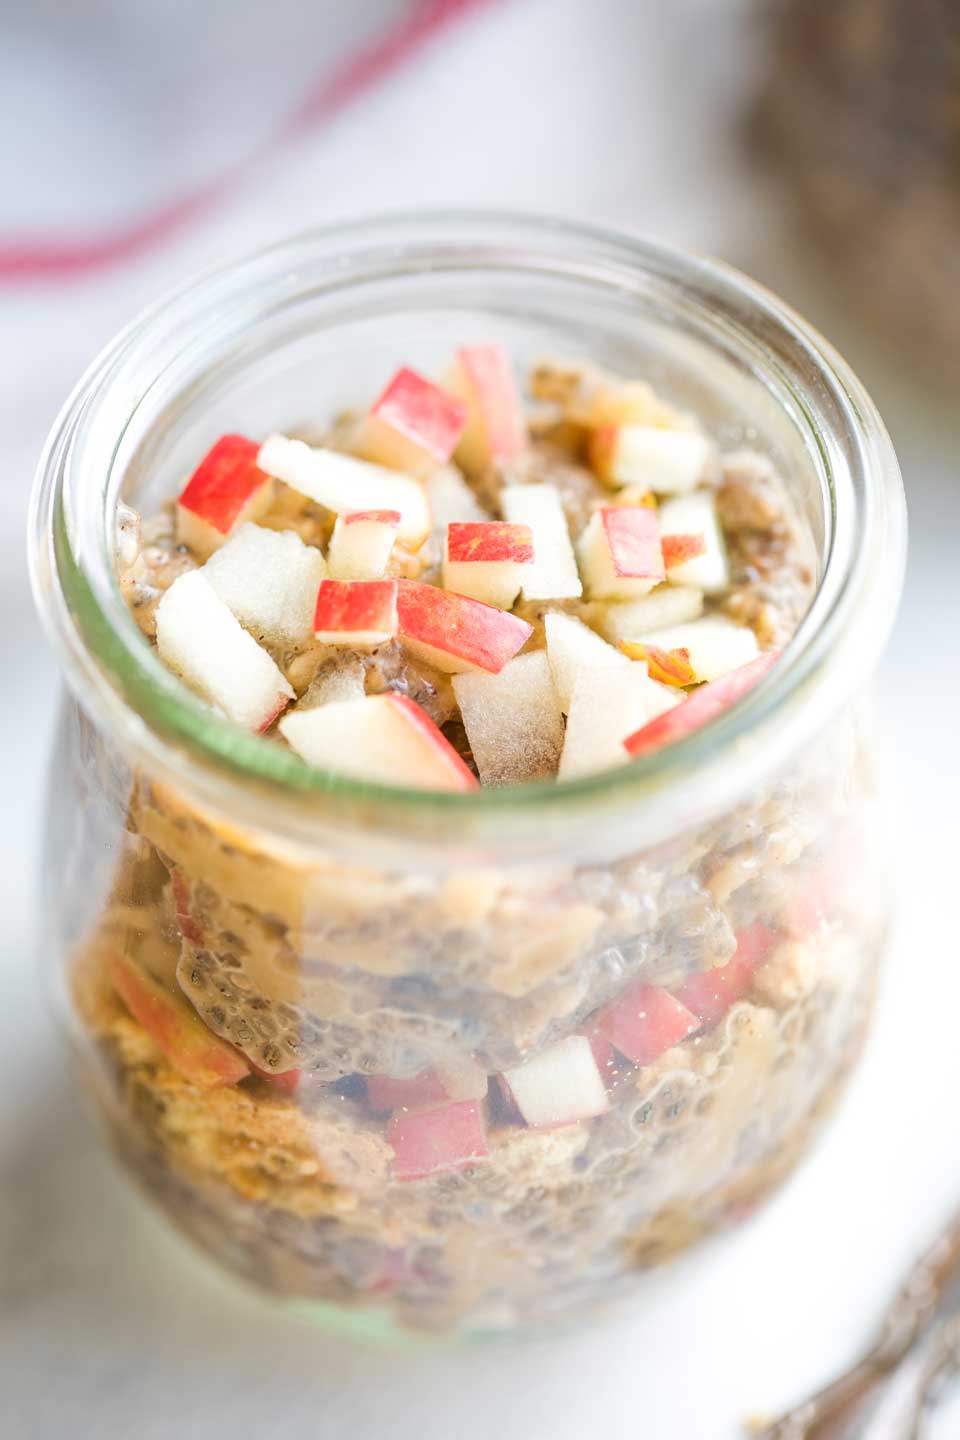 closeup of one jar of the pudding, served in layers with crumbled graham crackers and chopped bits of apple in between pudding layers